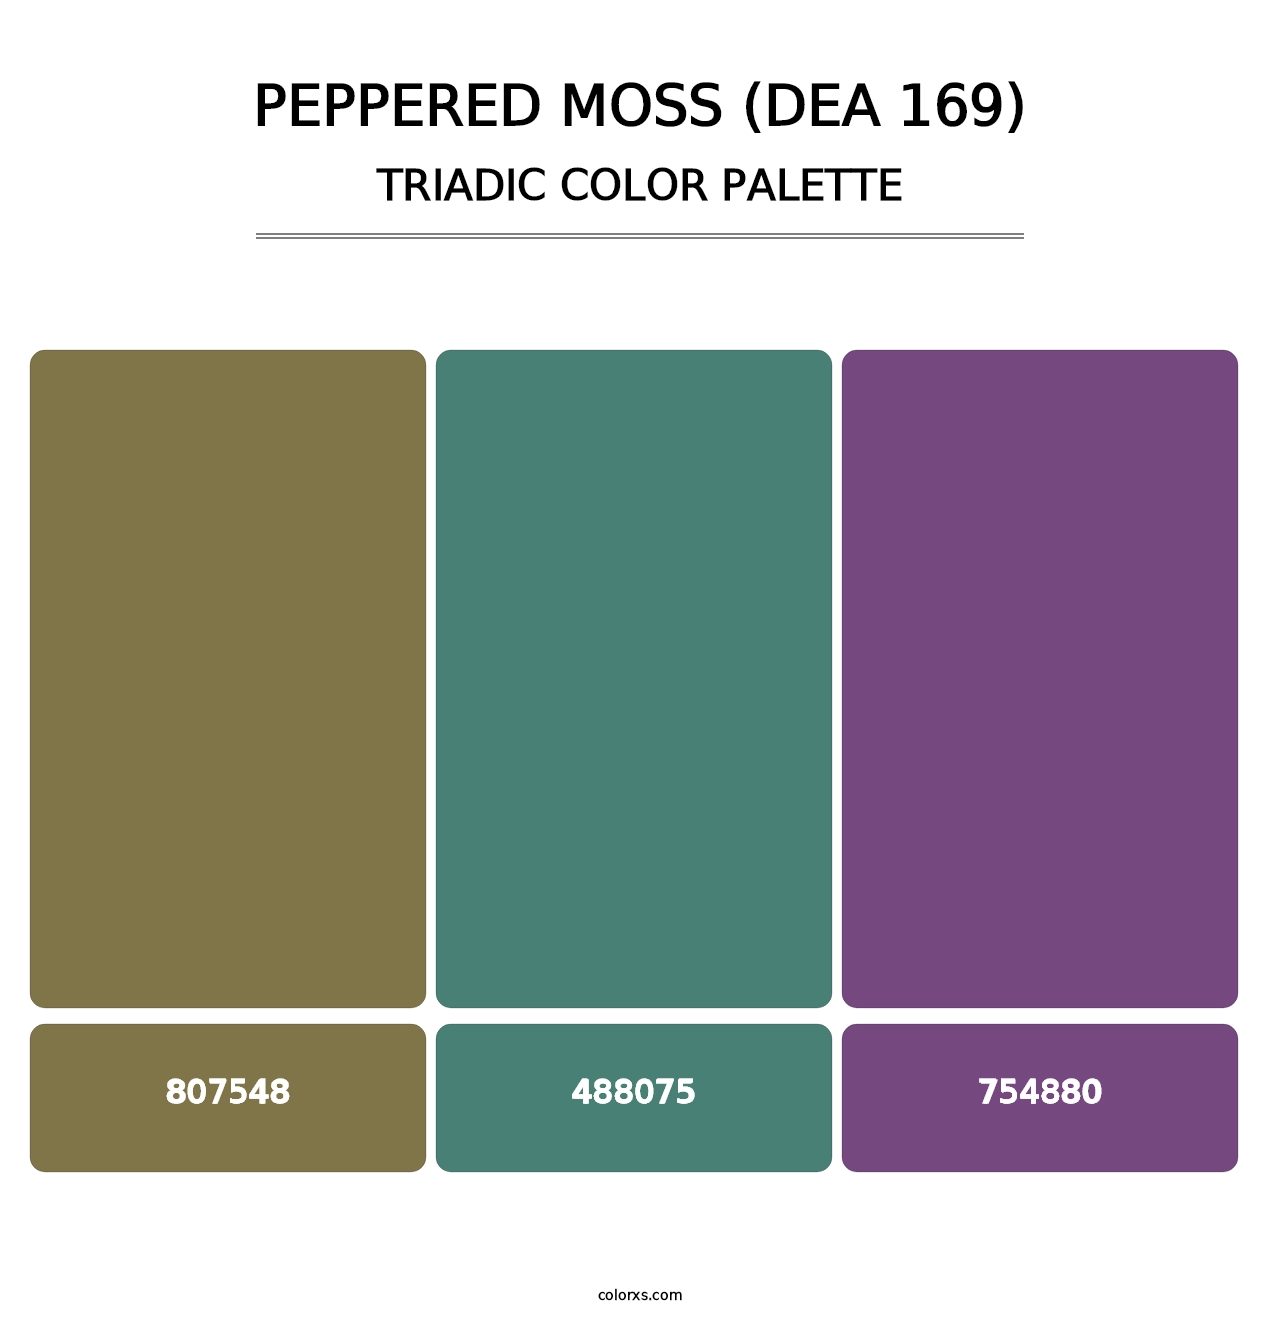 Peppered Moss (DEA 169) - Triadic Color Palette